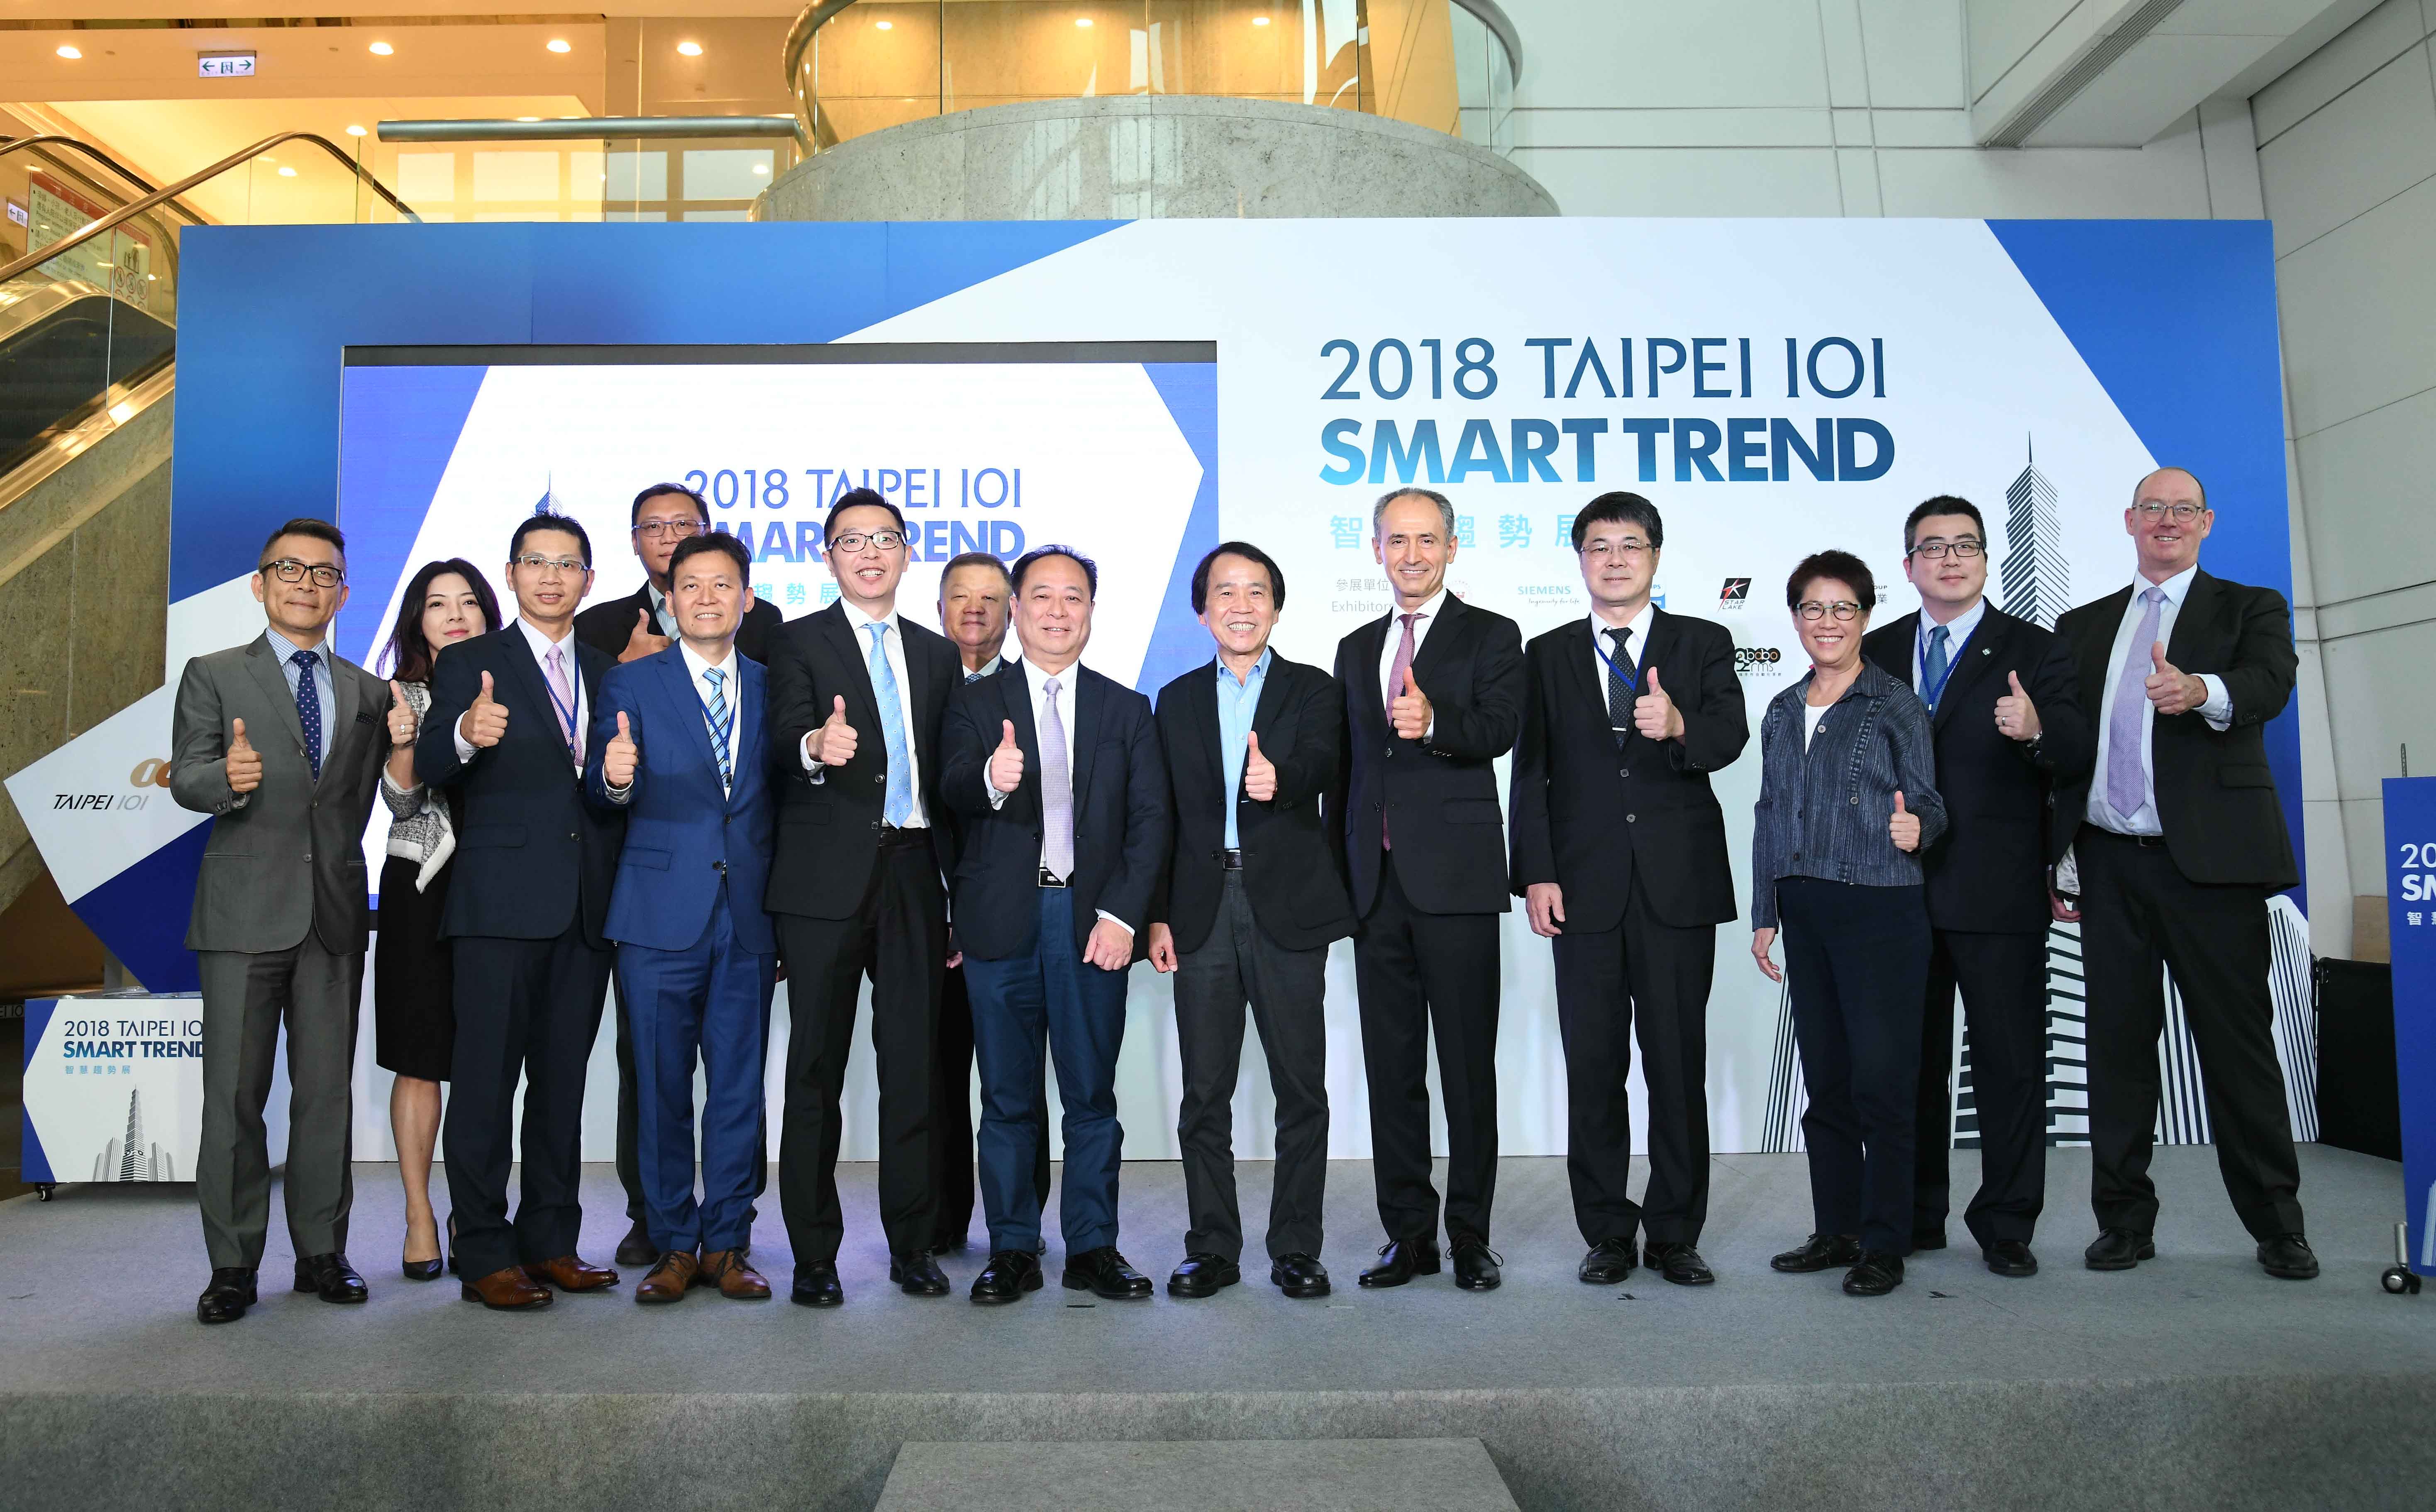 From 10/16-19, Tai Yeh has participated in the 101 Smart Trend Exhibition to unveil Haier’s new magnetic bearing centrifugal chiller/compressor.